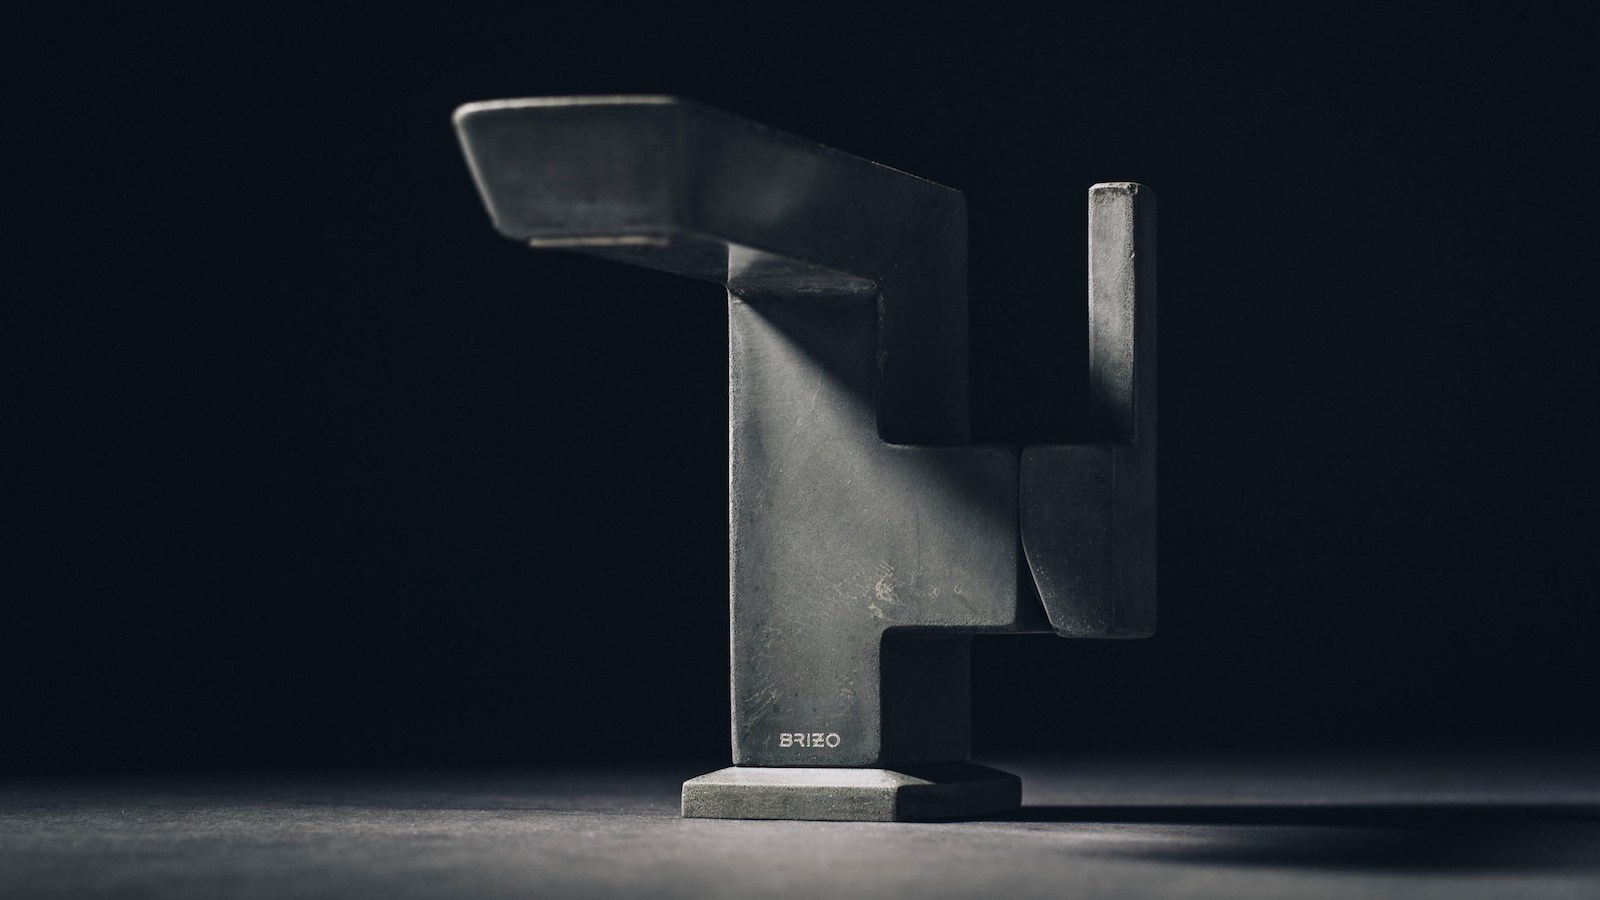 Brizo Brings Beauty into Bathrooms with Concrete Faucets